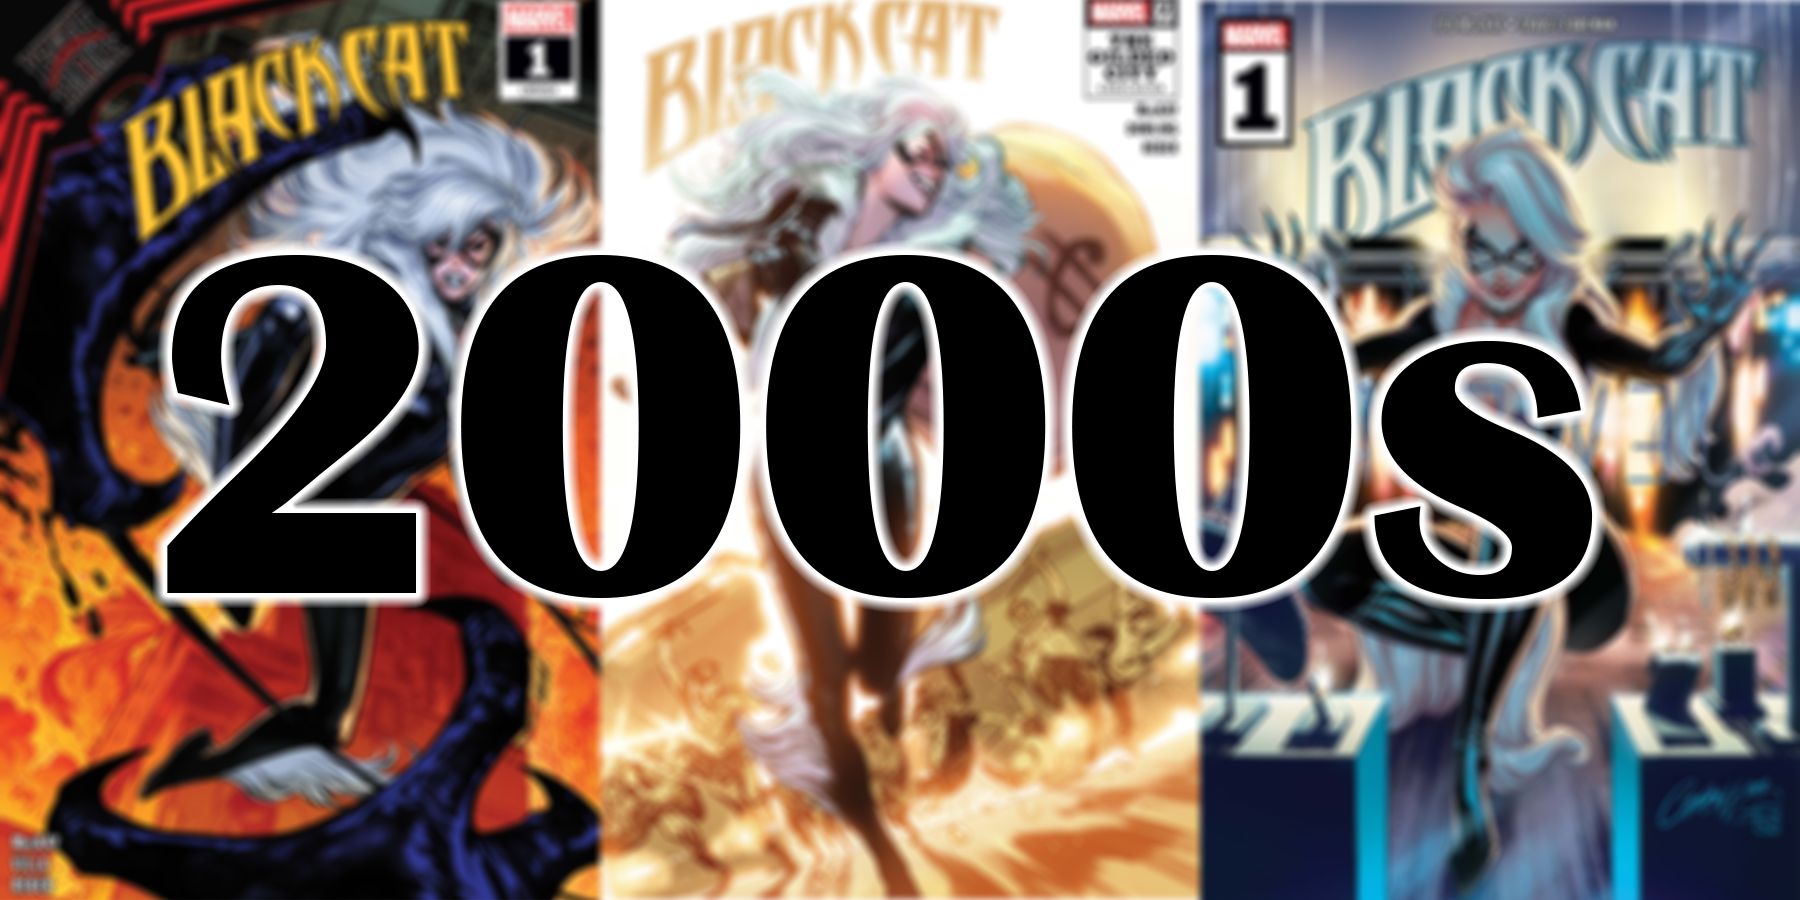 The 2000s year on top of a blurred background featuring 3 covers from Black Cat comic books by Marvel.